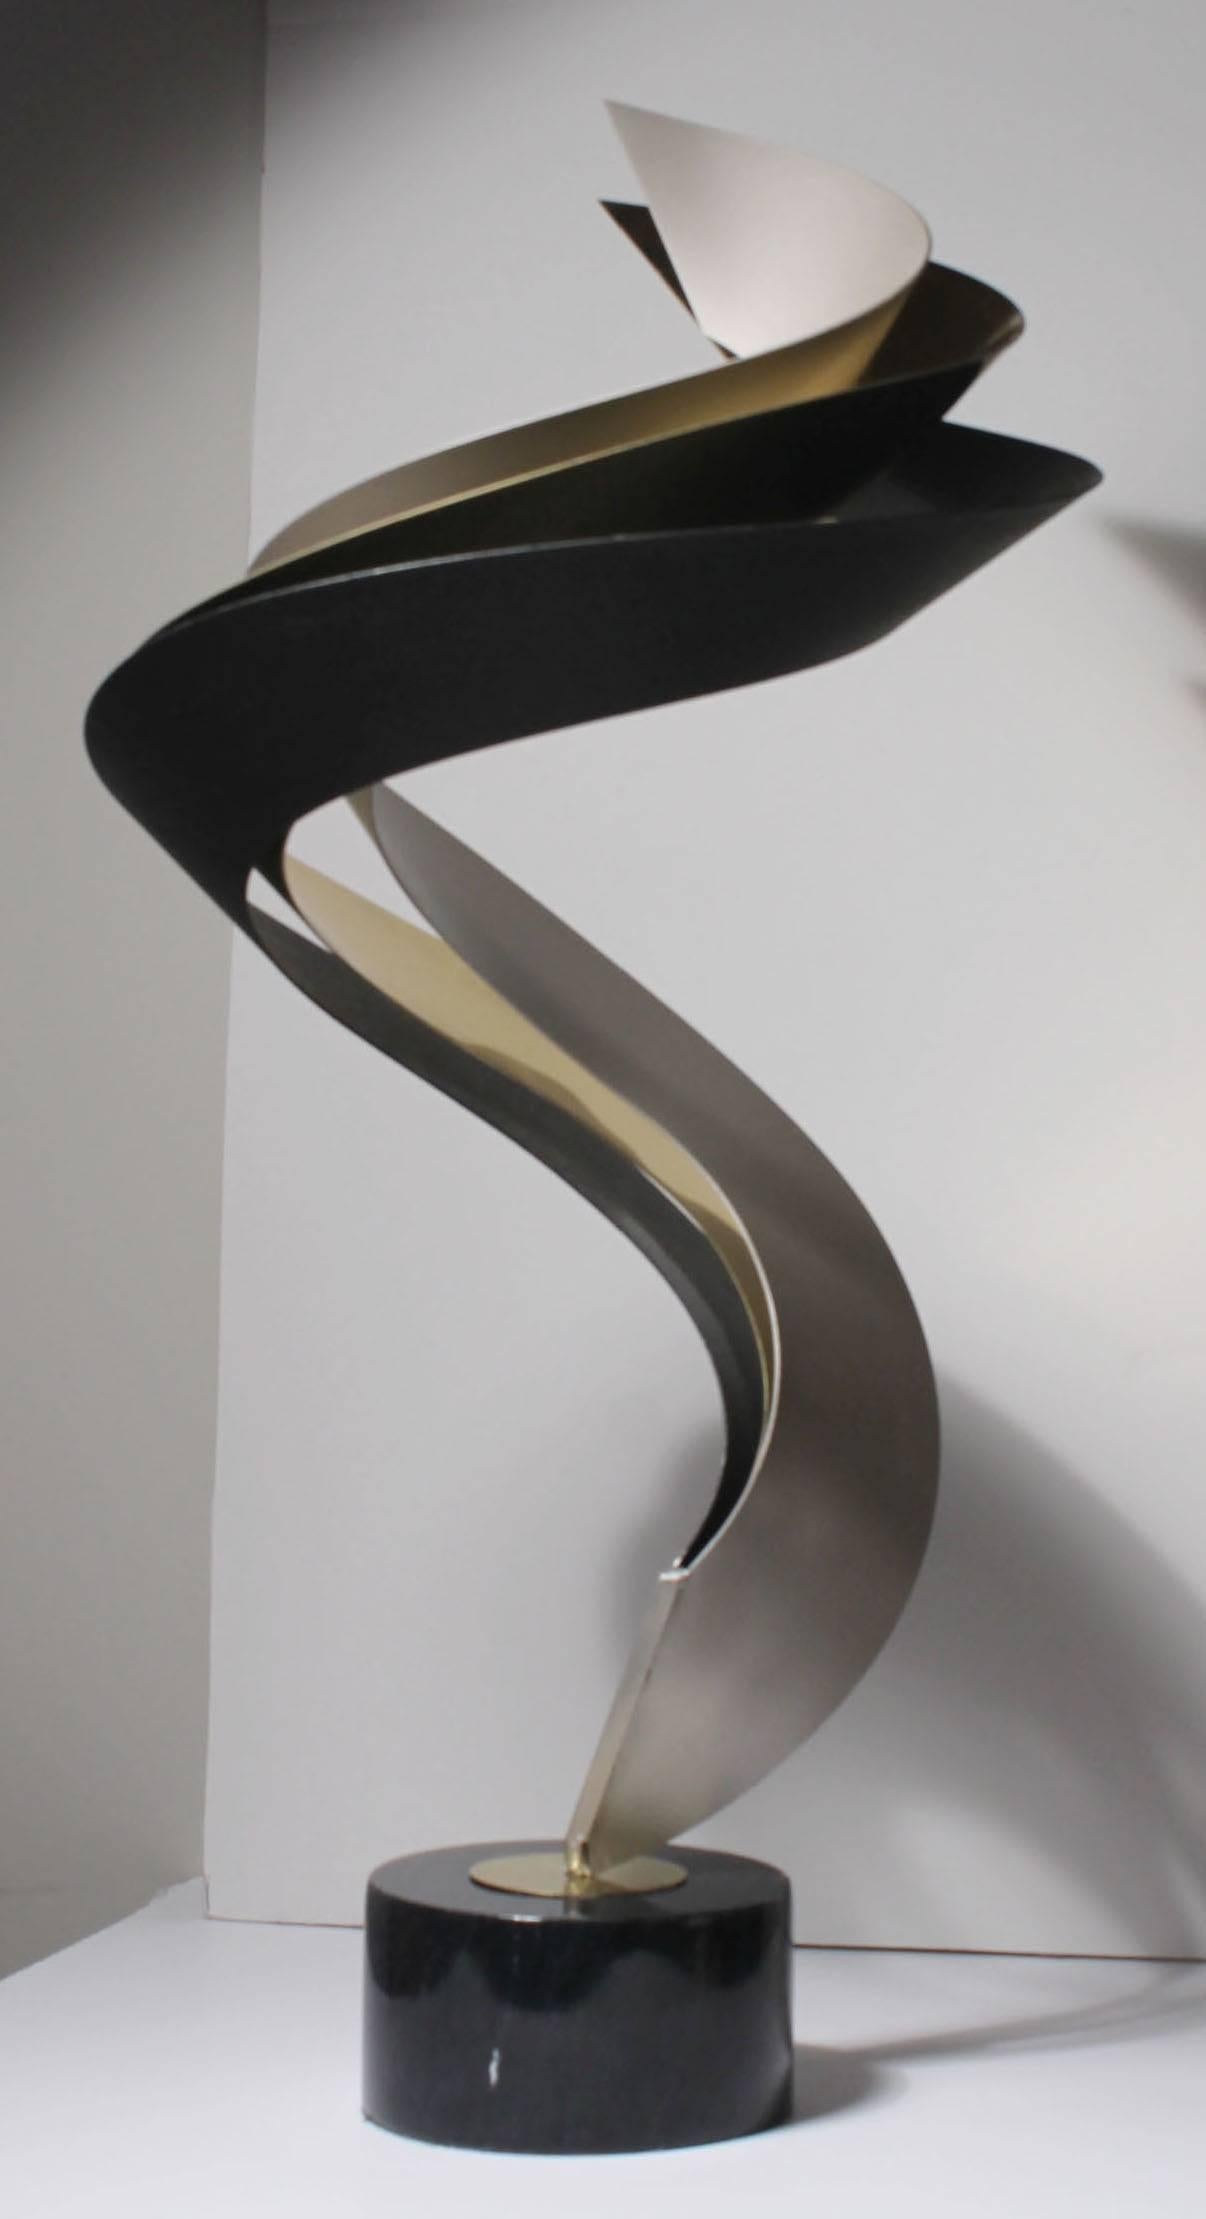 Elegant Jere table art sculpture
Comprised of three metal finishes. Black, brass and mat silver.
Marble base.
Signed and dated (1993) on the base.

Dimension are approximately please confirm if exact dims are desired.
 